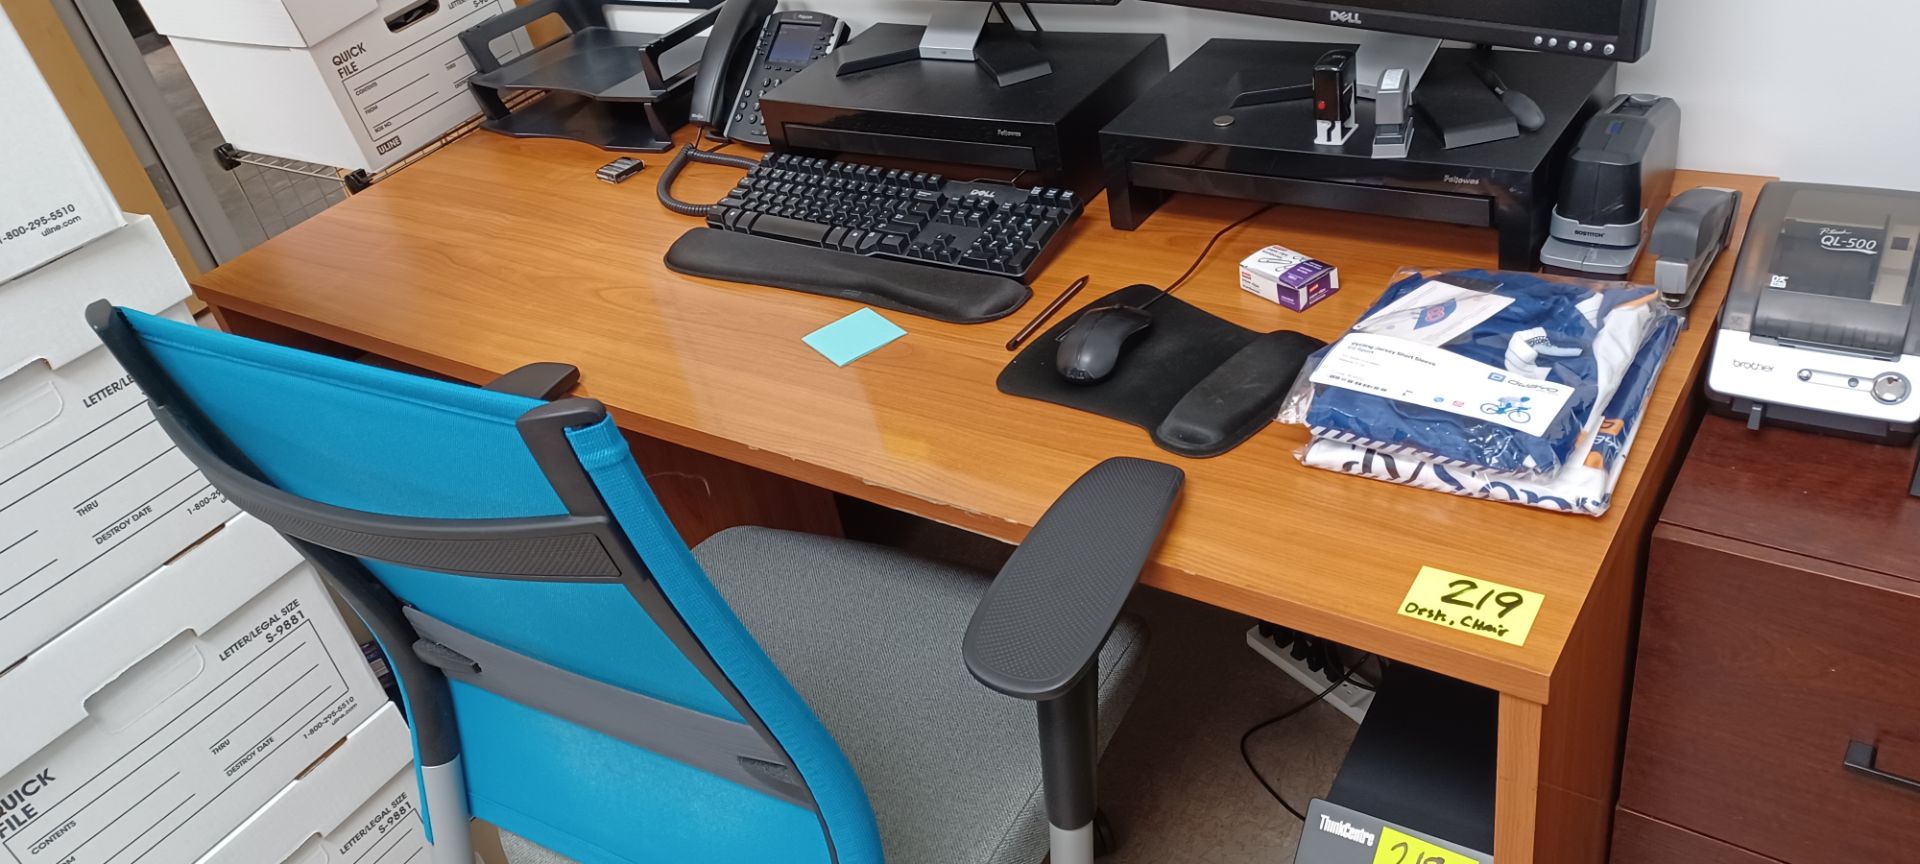 DESK & CHAIR ONLY (NO CONTENT ON DESK)